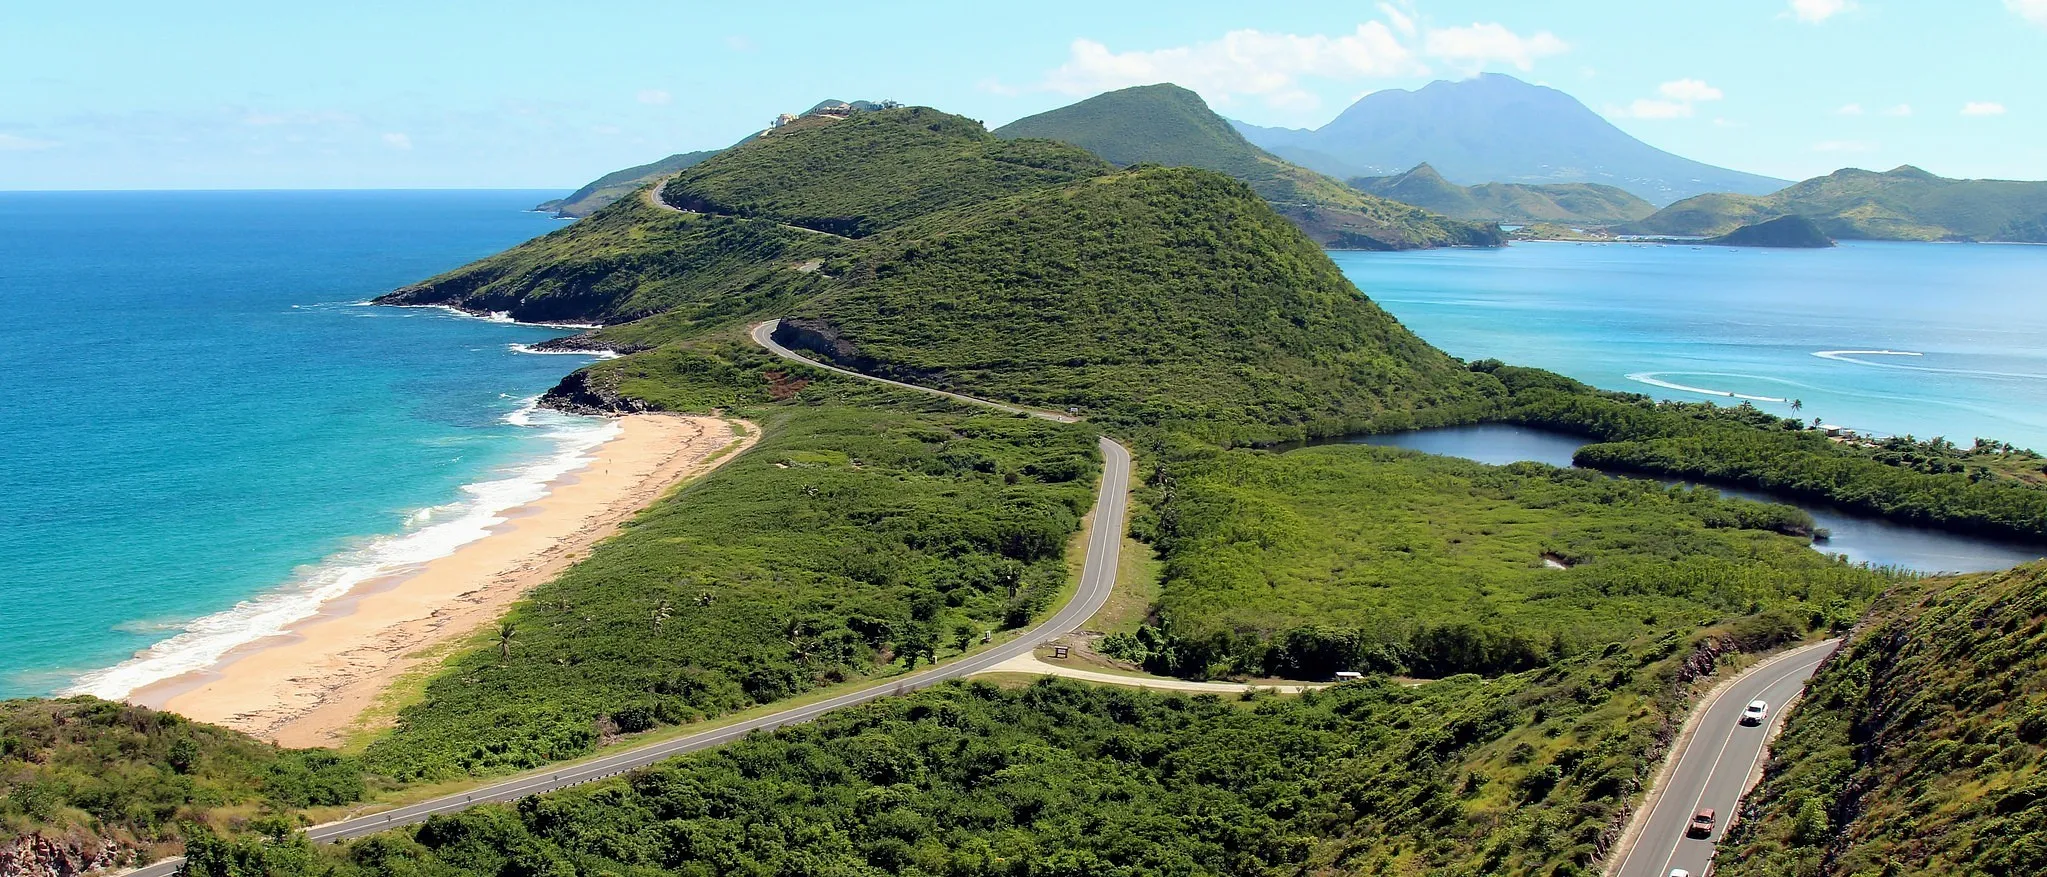 Timothy Hill Overlook in Saint Kitts and Nevis, Caribbean | Observation Decks - Rated 3.8